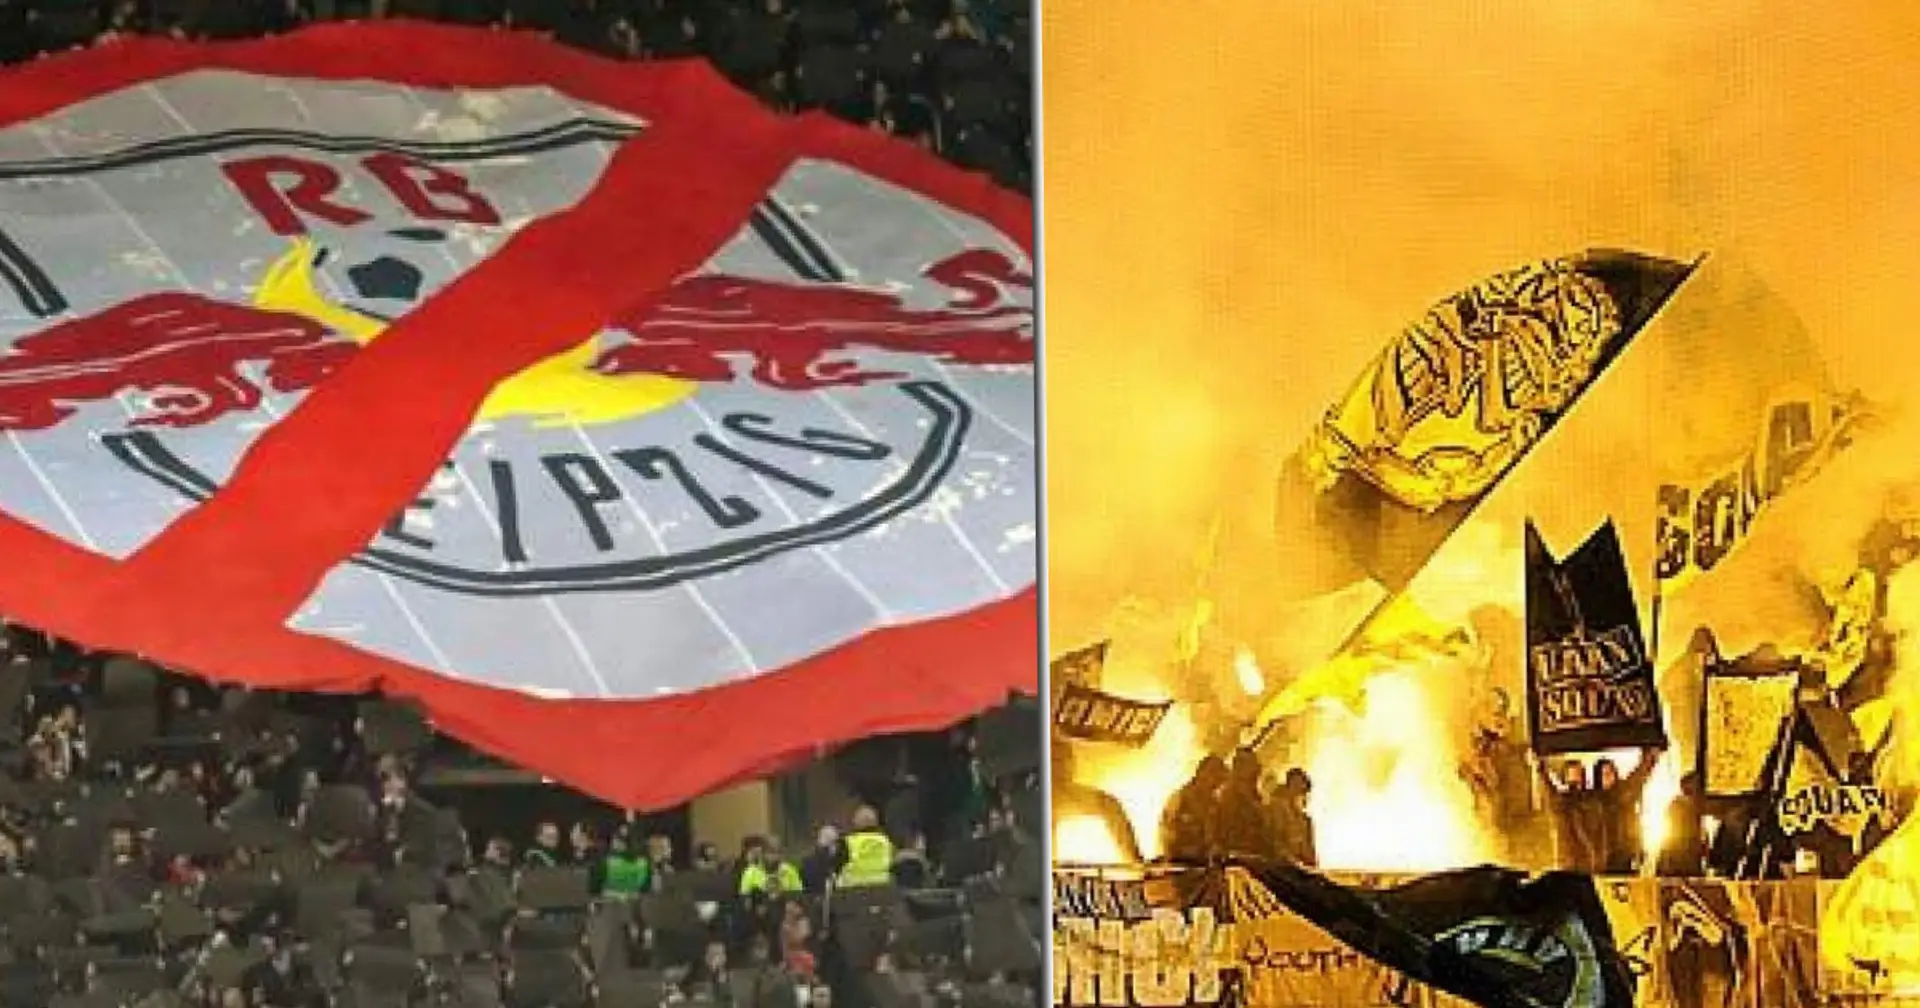 'RB Leipzig — advertising board, Man City —sportswashing, Red Star — sponsored by Gazprom': Young Boys ultras slam Champions League opponents